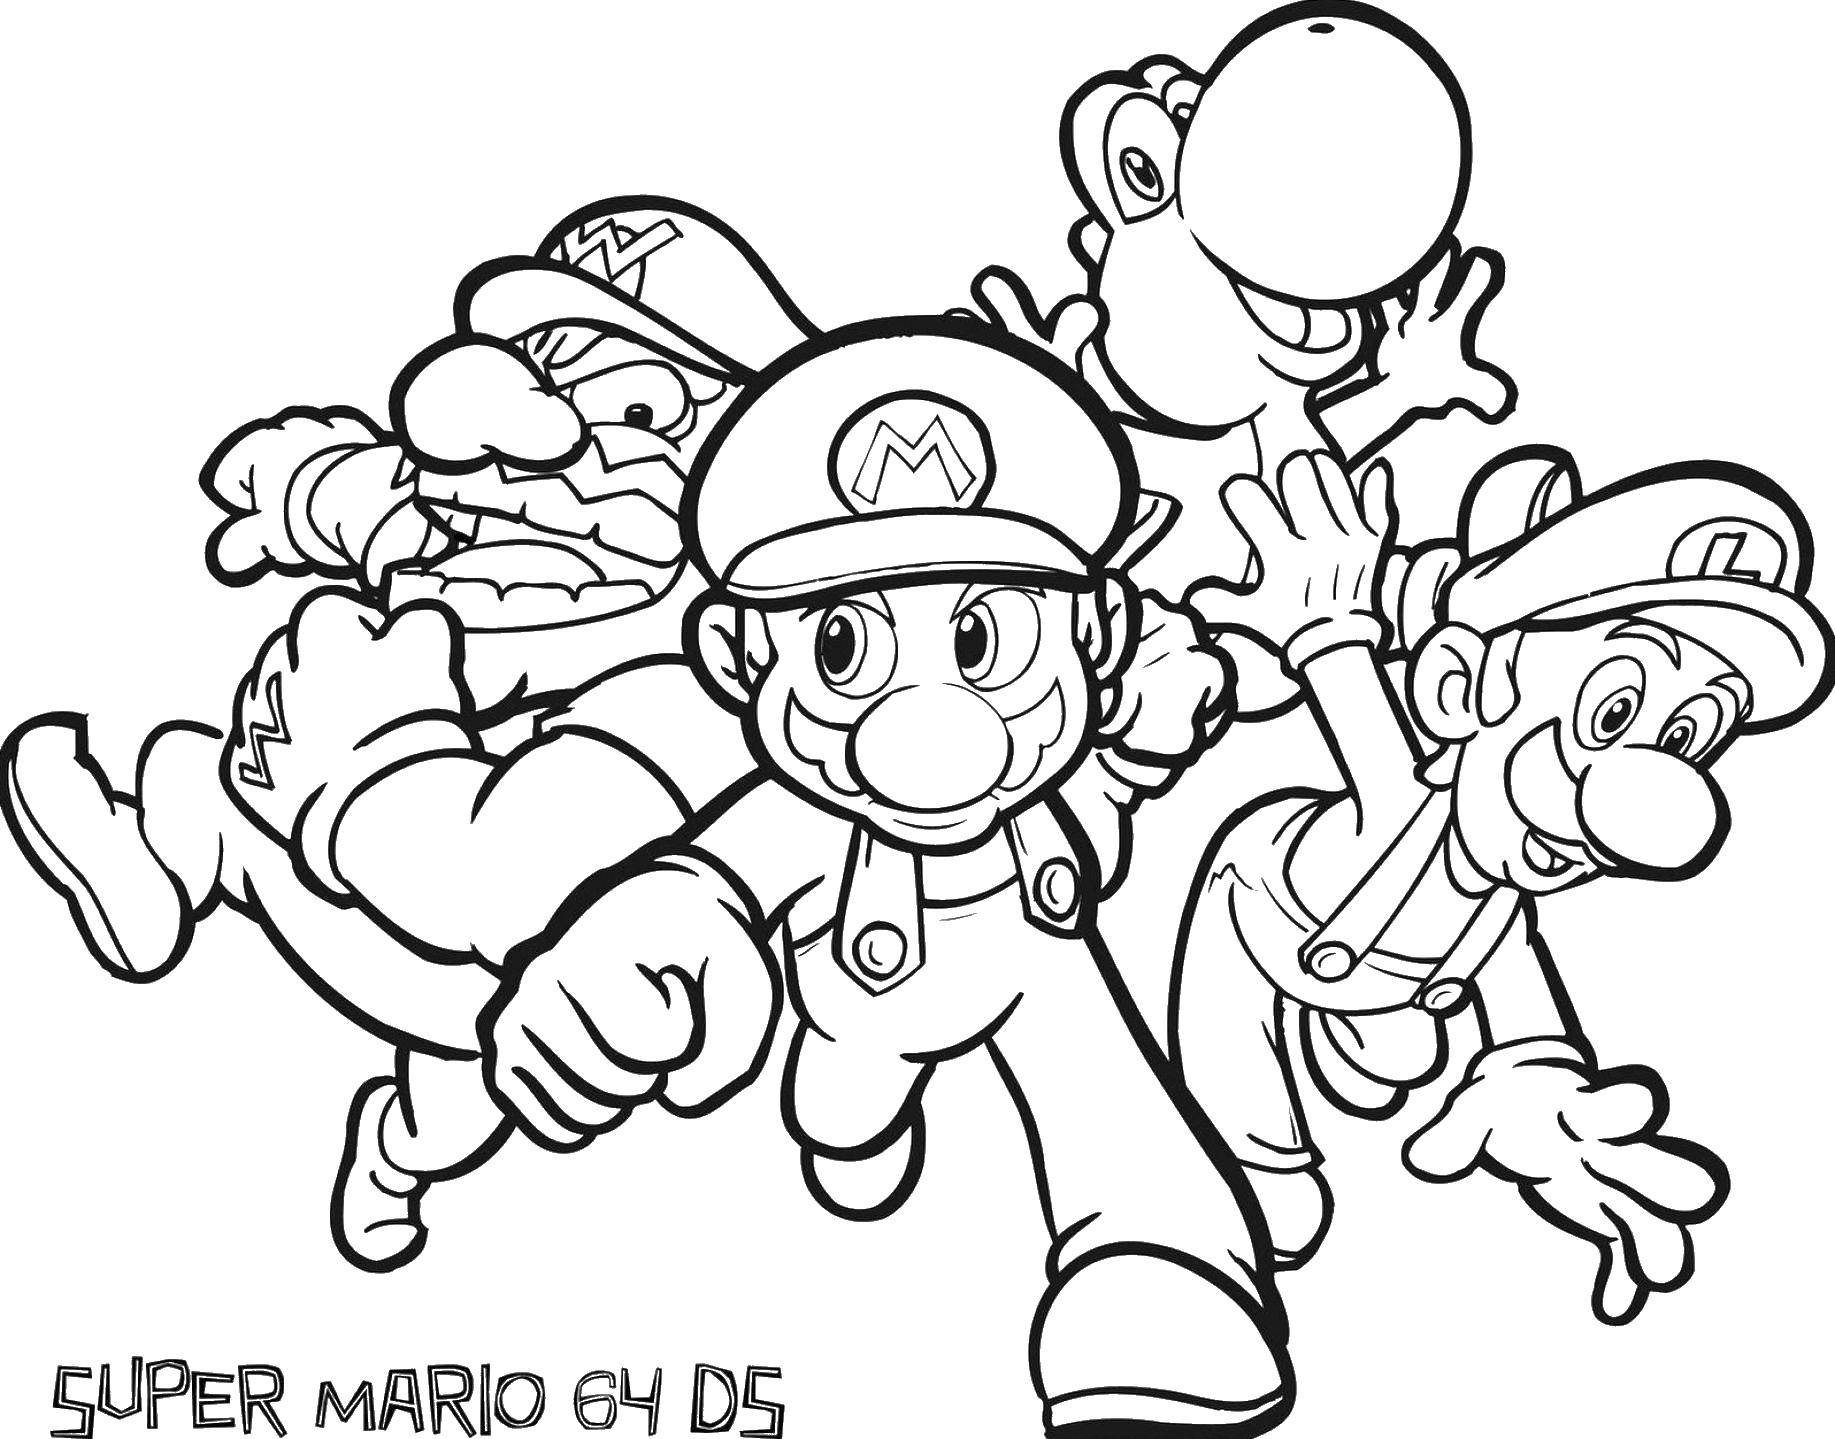 Coloring Mario, wario and Luigi. Category The character from the game. Tags:  Games, Mario.